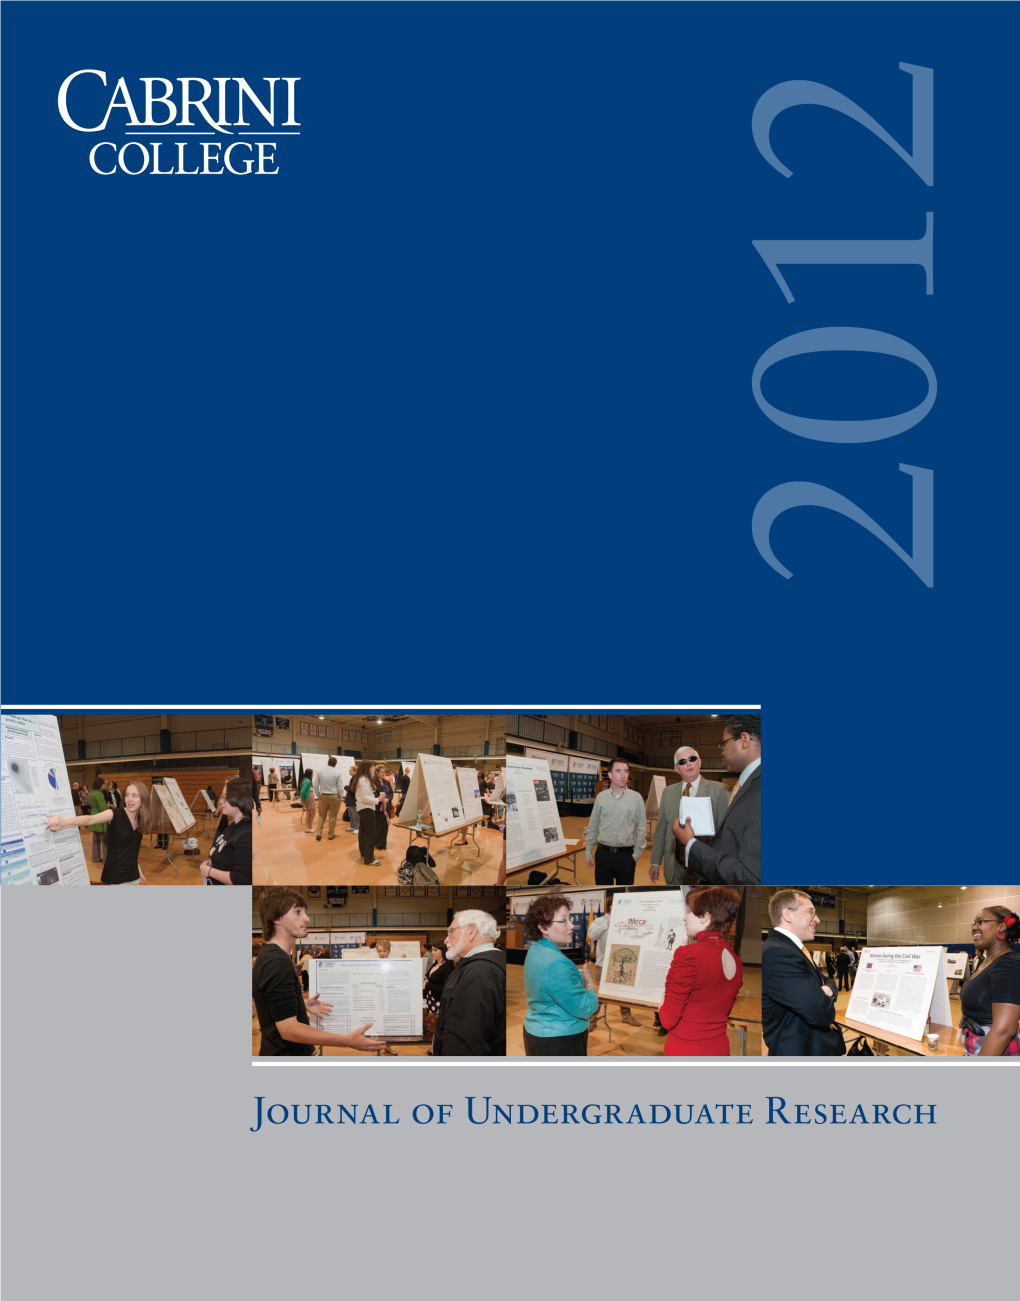 2012 Research Journal